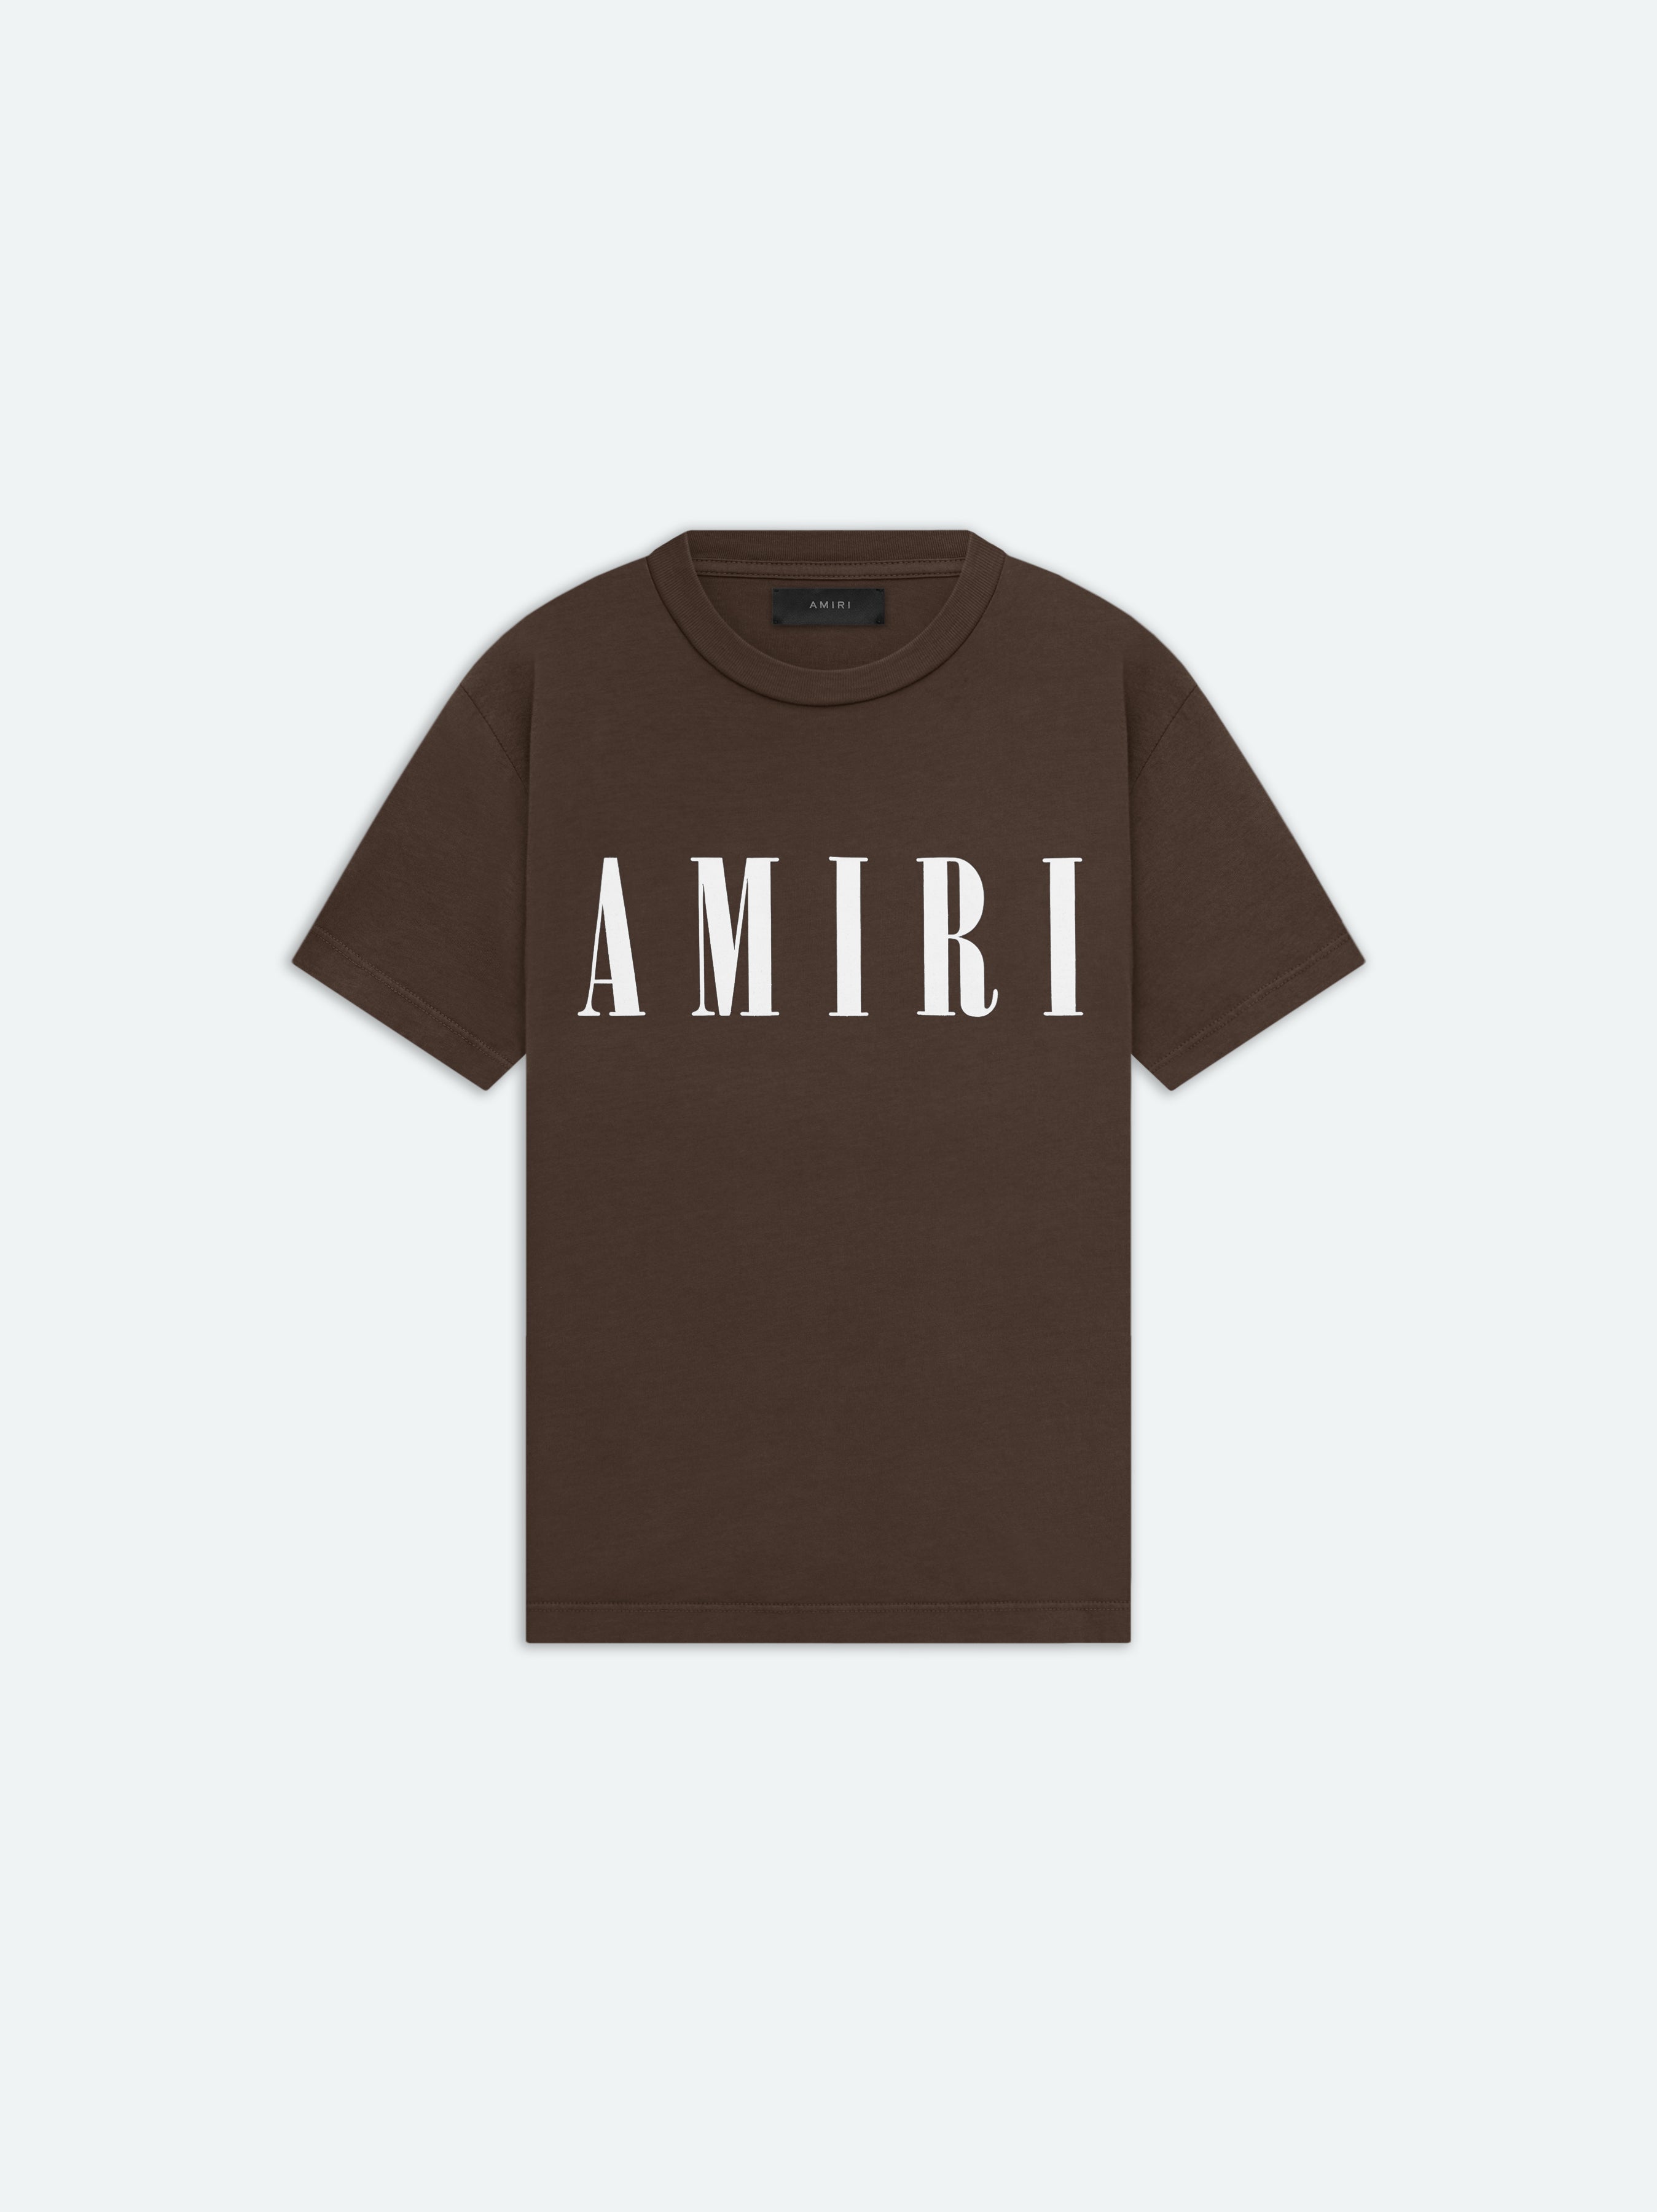 Product WOMEN - CORE LOGO SLIM FIT TEE - Brown featured image